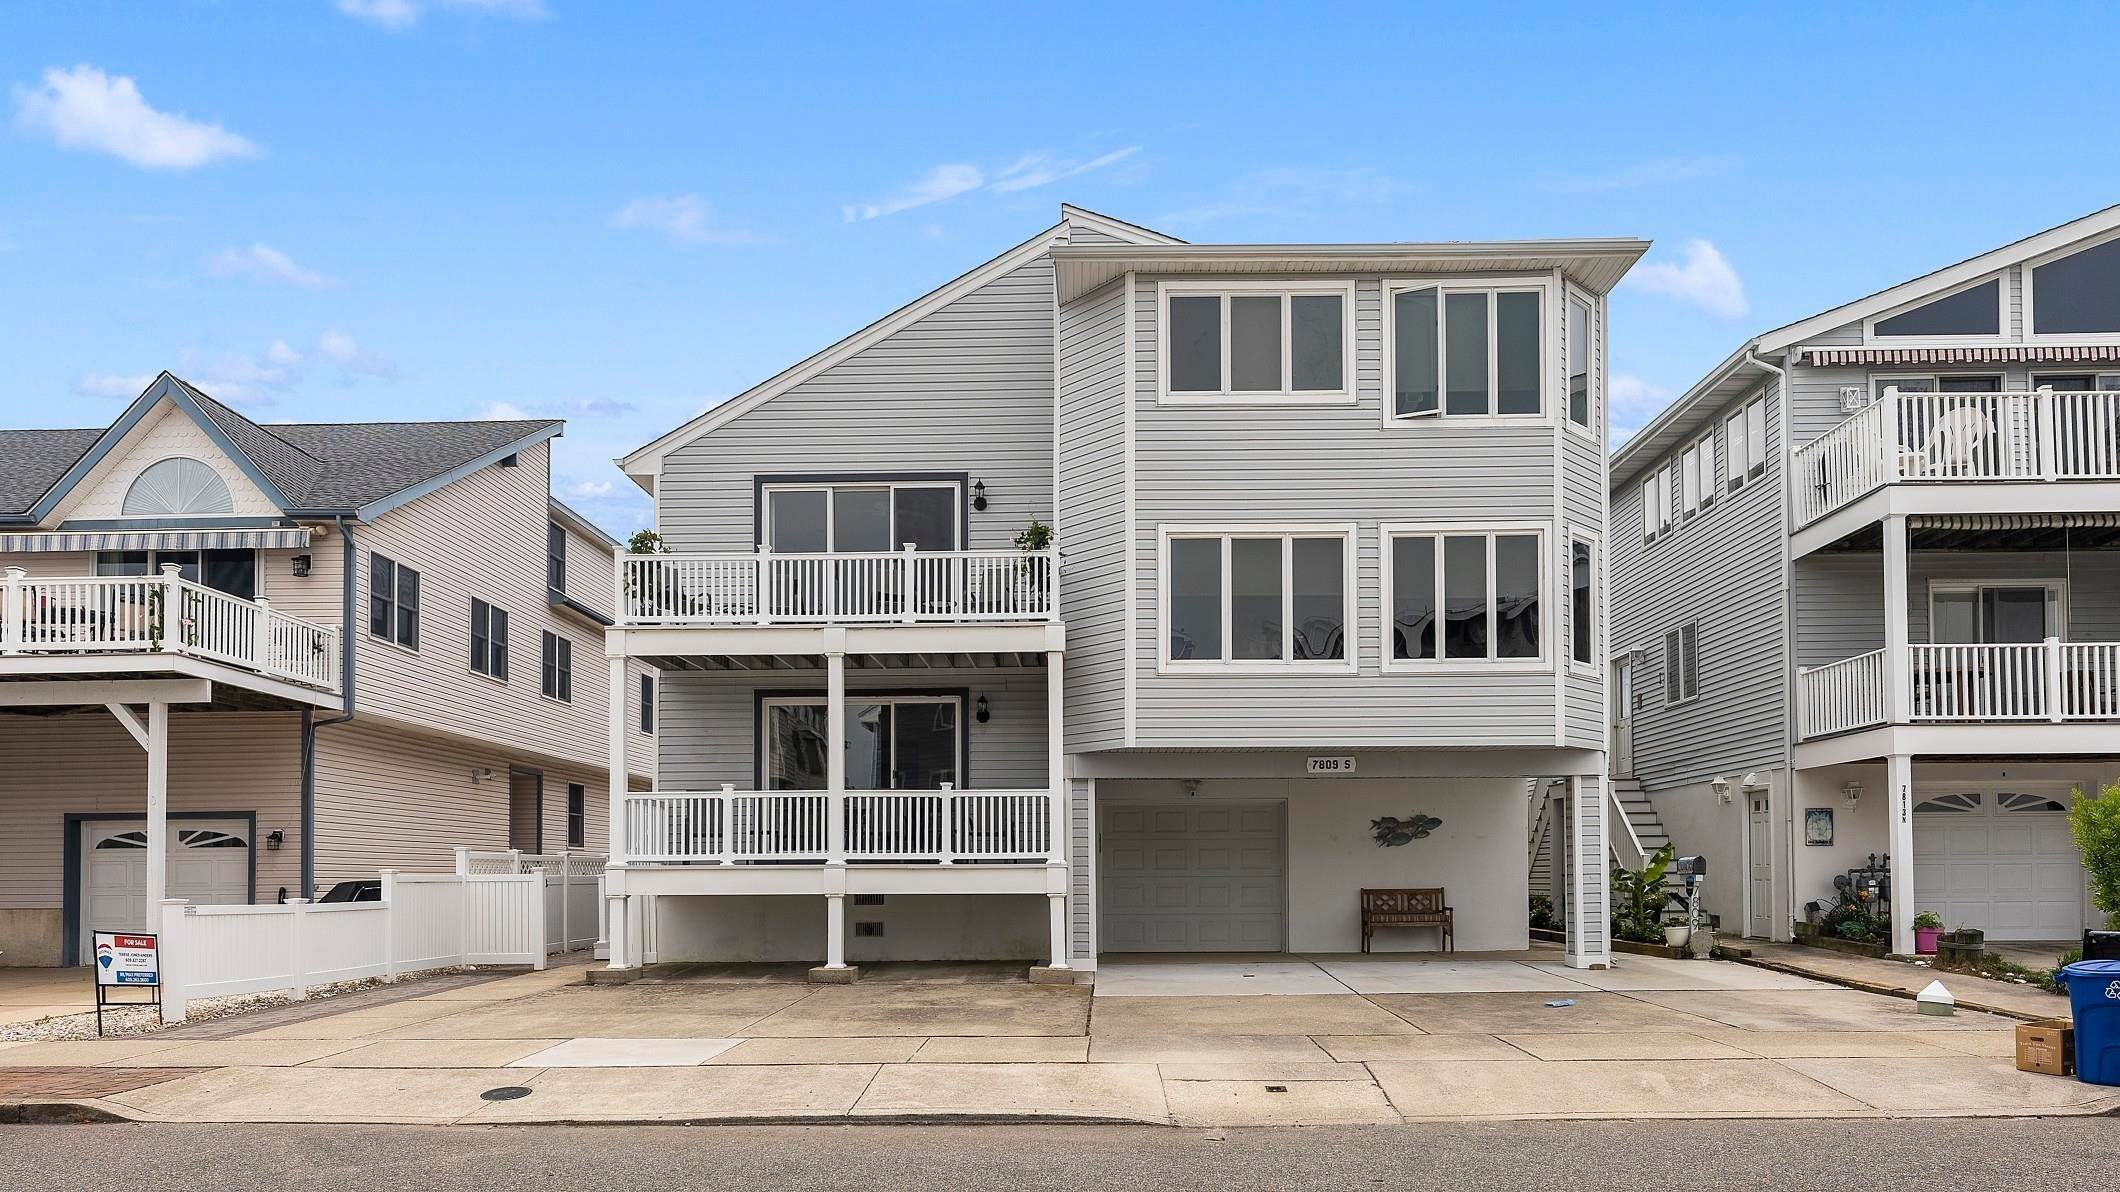 3. Condominiums for Sale at 7809 Roberts Avenue Sea Isle City, New Jersey 08243 United States